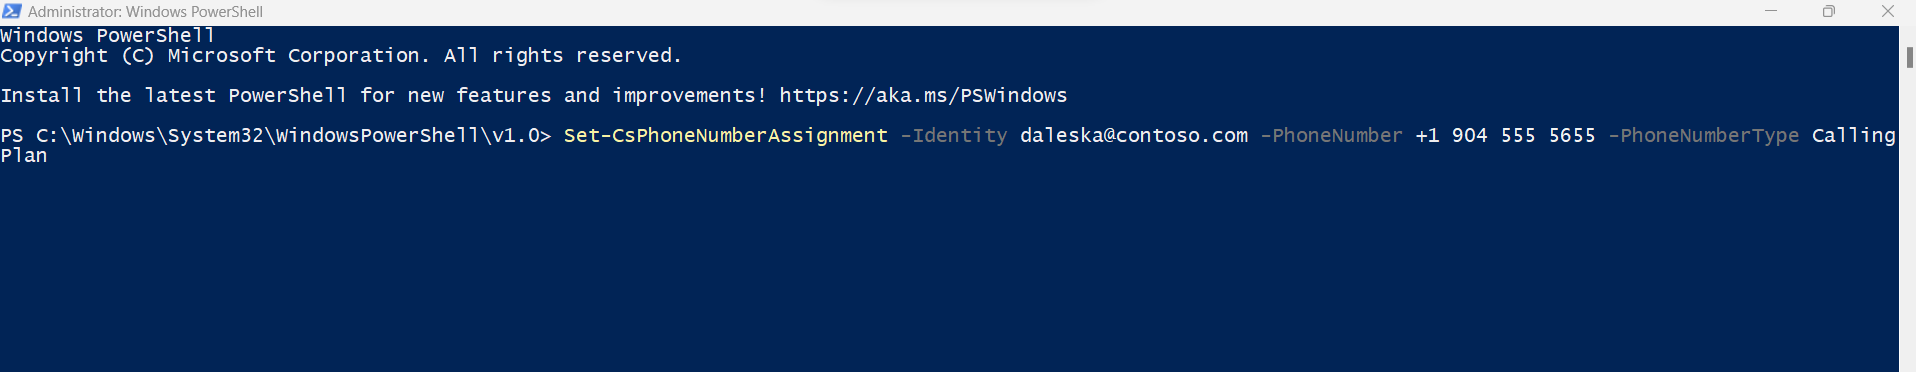 powershell .png